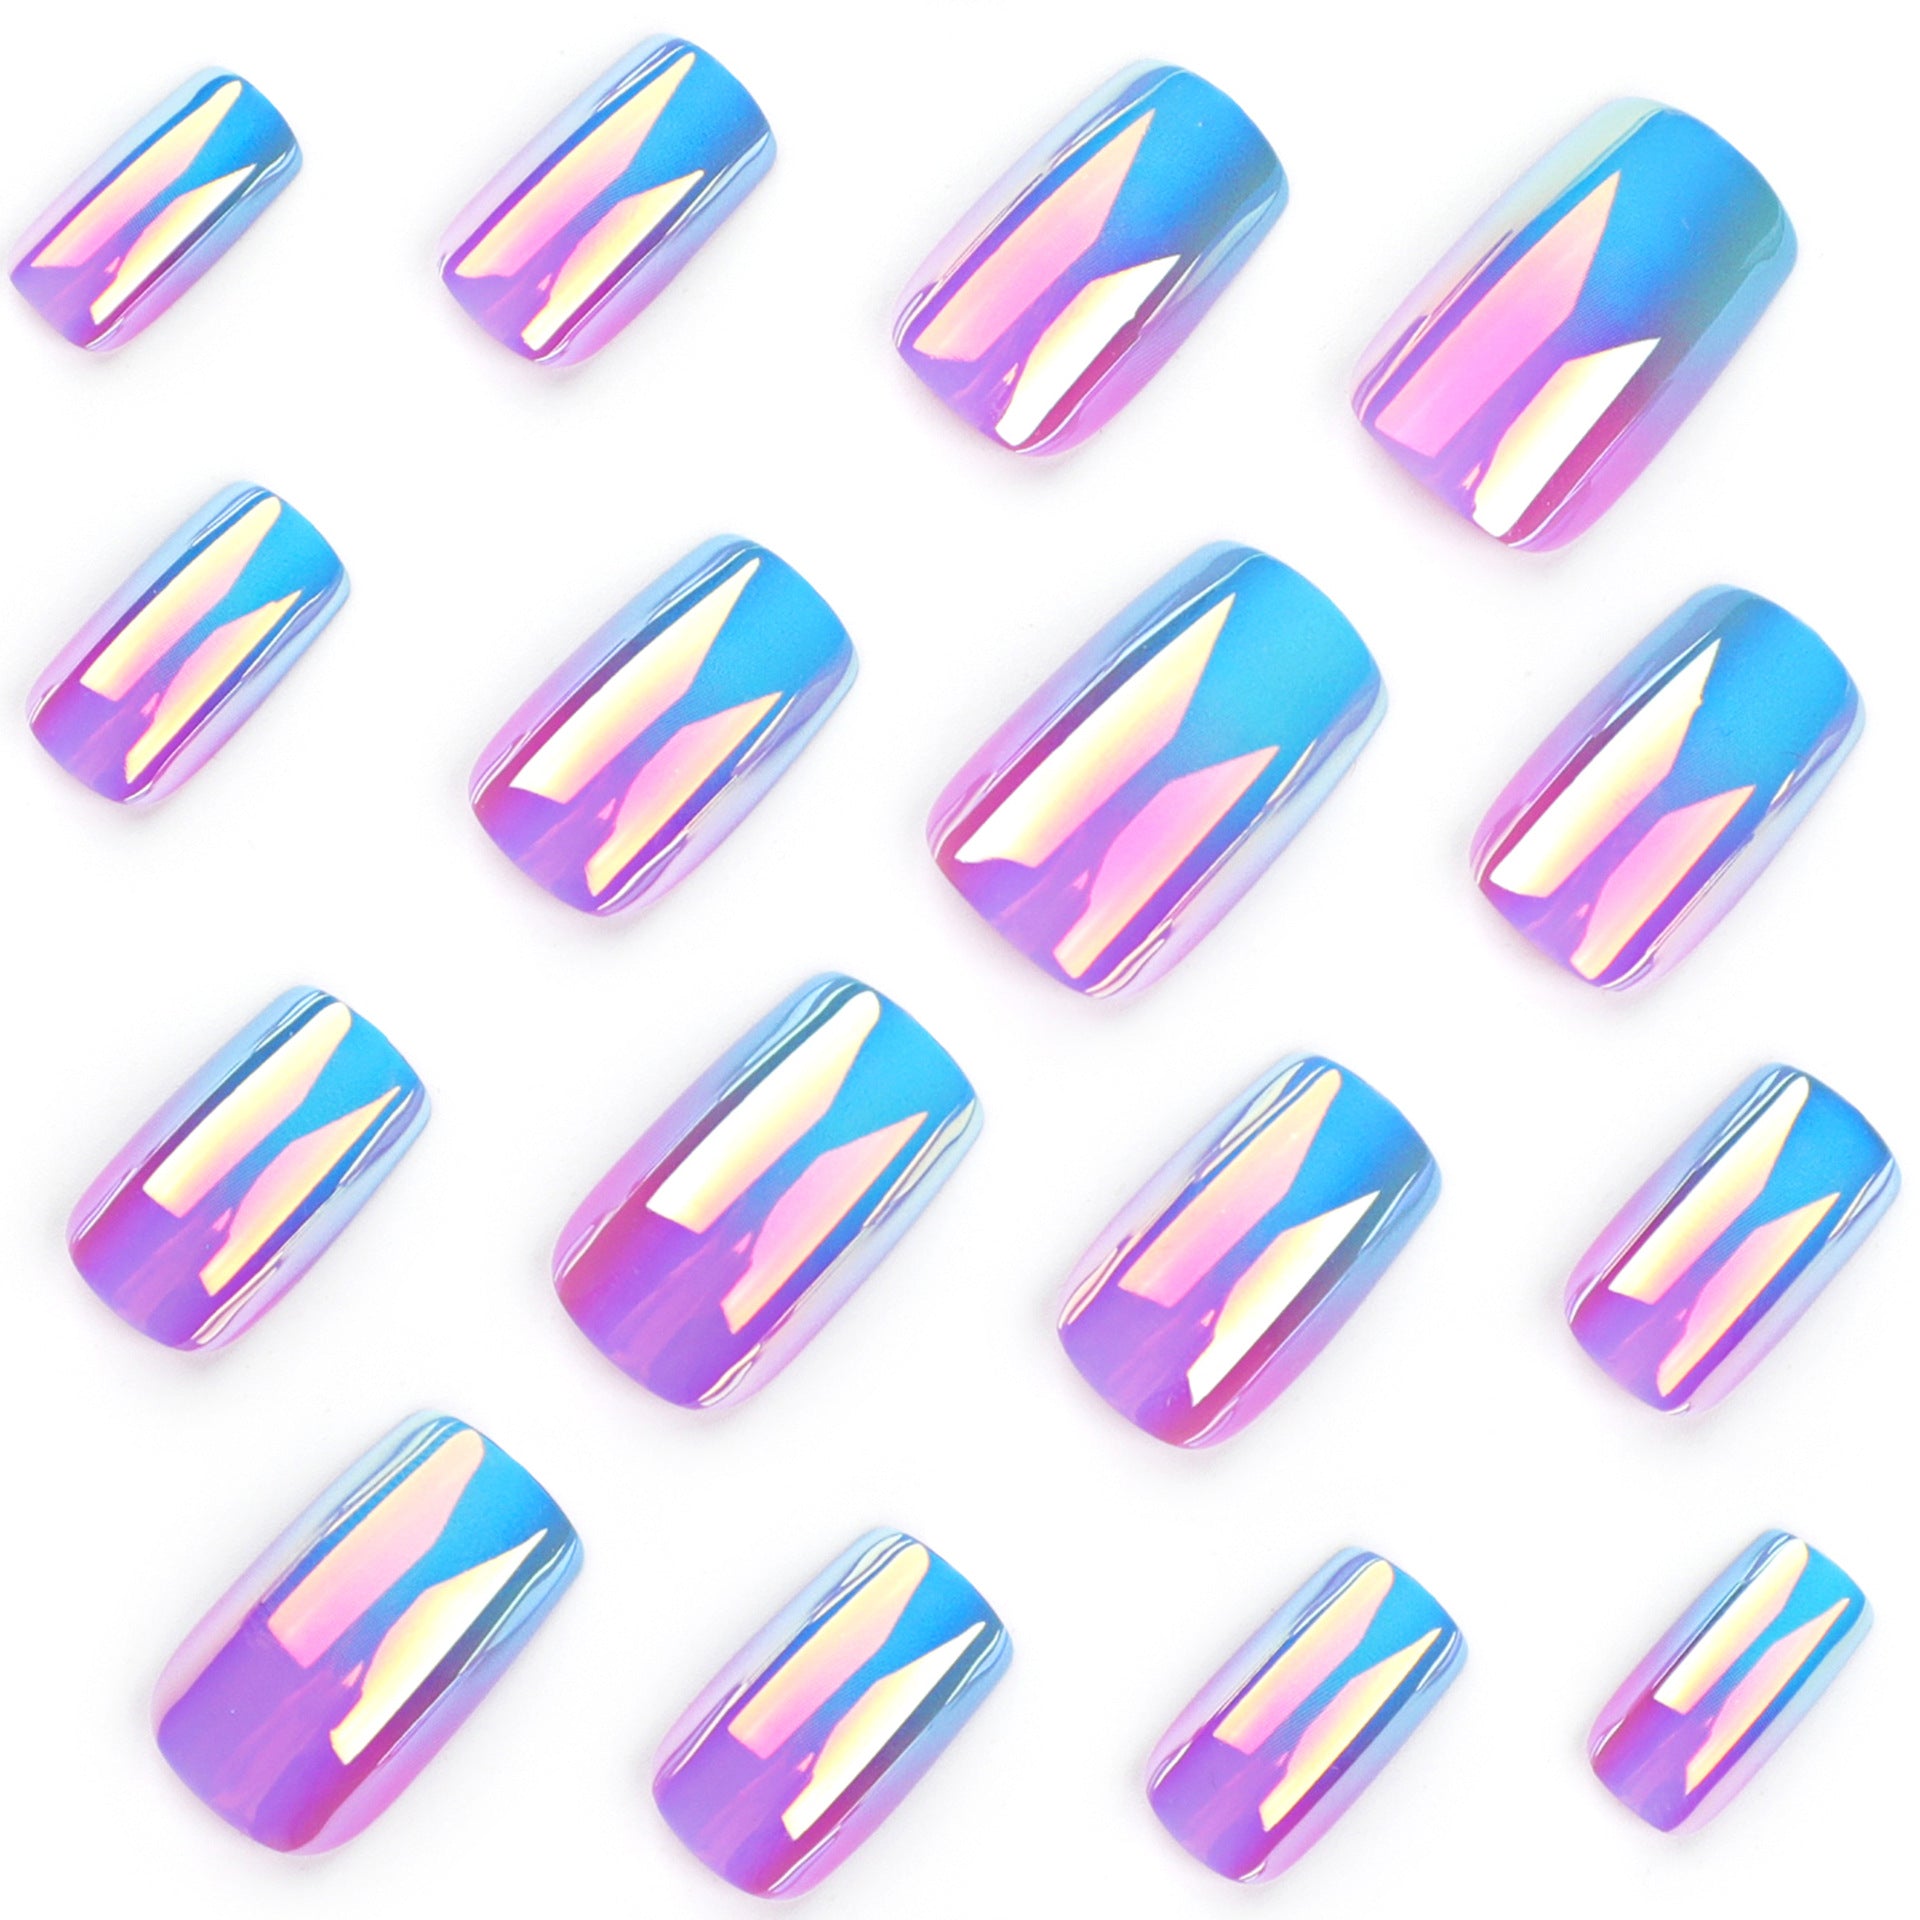 RAINBOW SHIMMER SQUARE SHAPE PRESS ON NAILS - Galspro